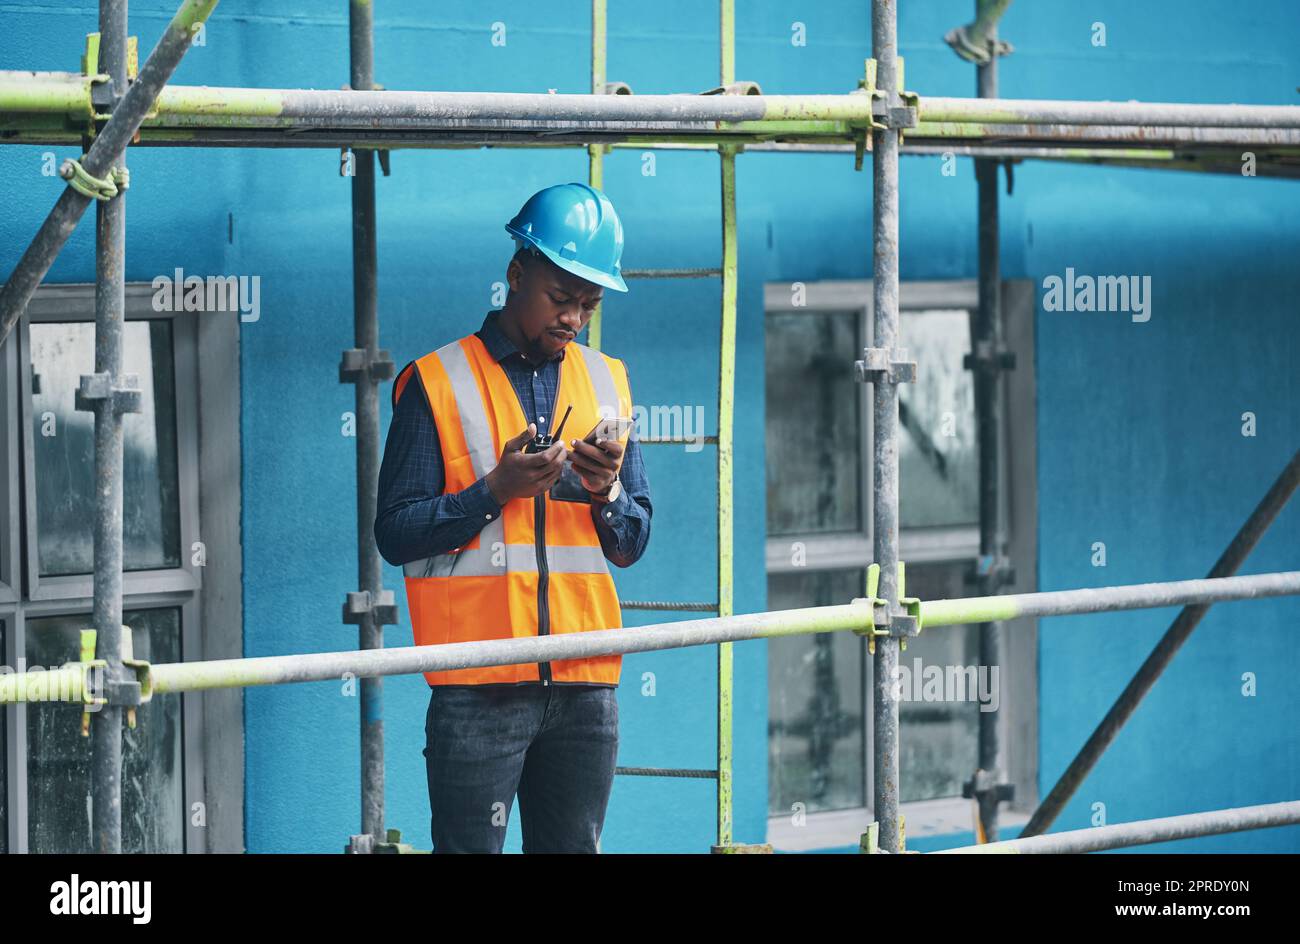 Male construction worker working checking a digital building plan on a phone. Busy urban development builder looking at buildings planning data to give industry information on a two way radio Stock Photo